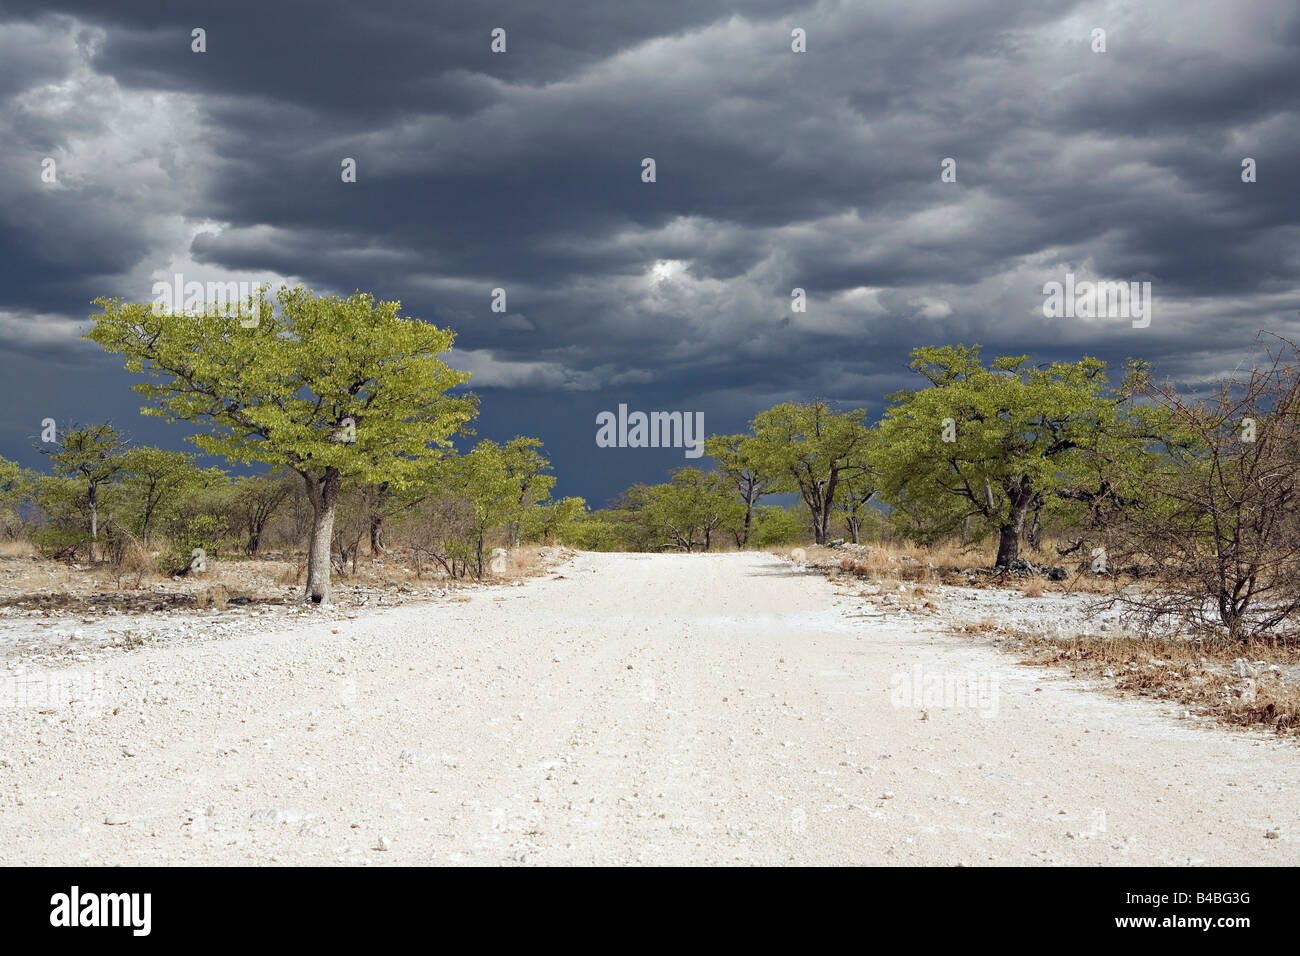 A scenic view of a distant thunderstorm on the Etosha National Park Namibia Stock Photo